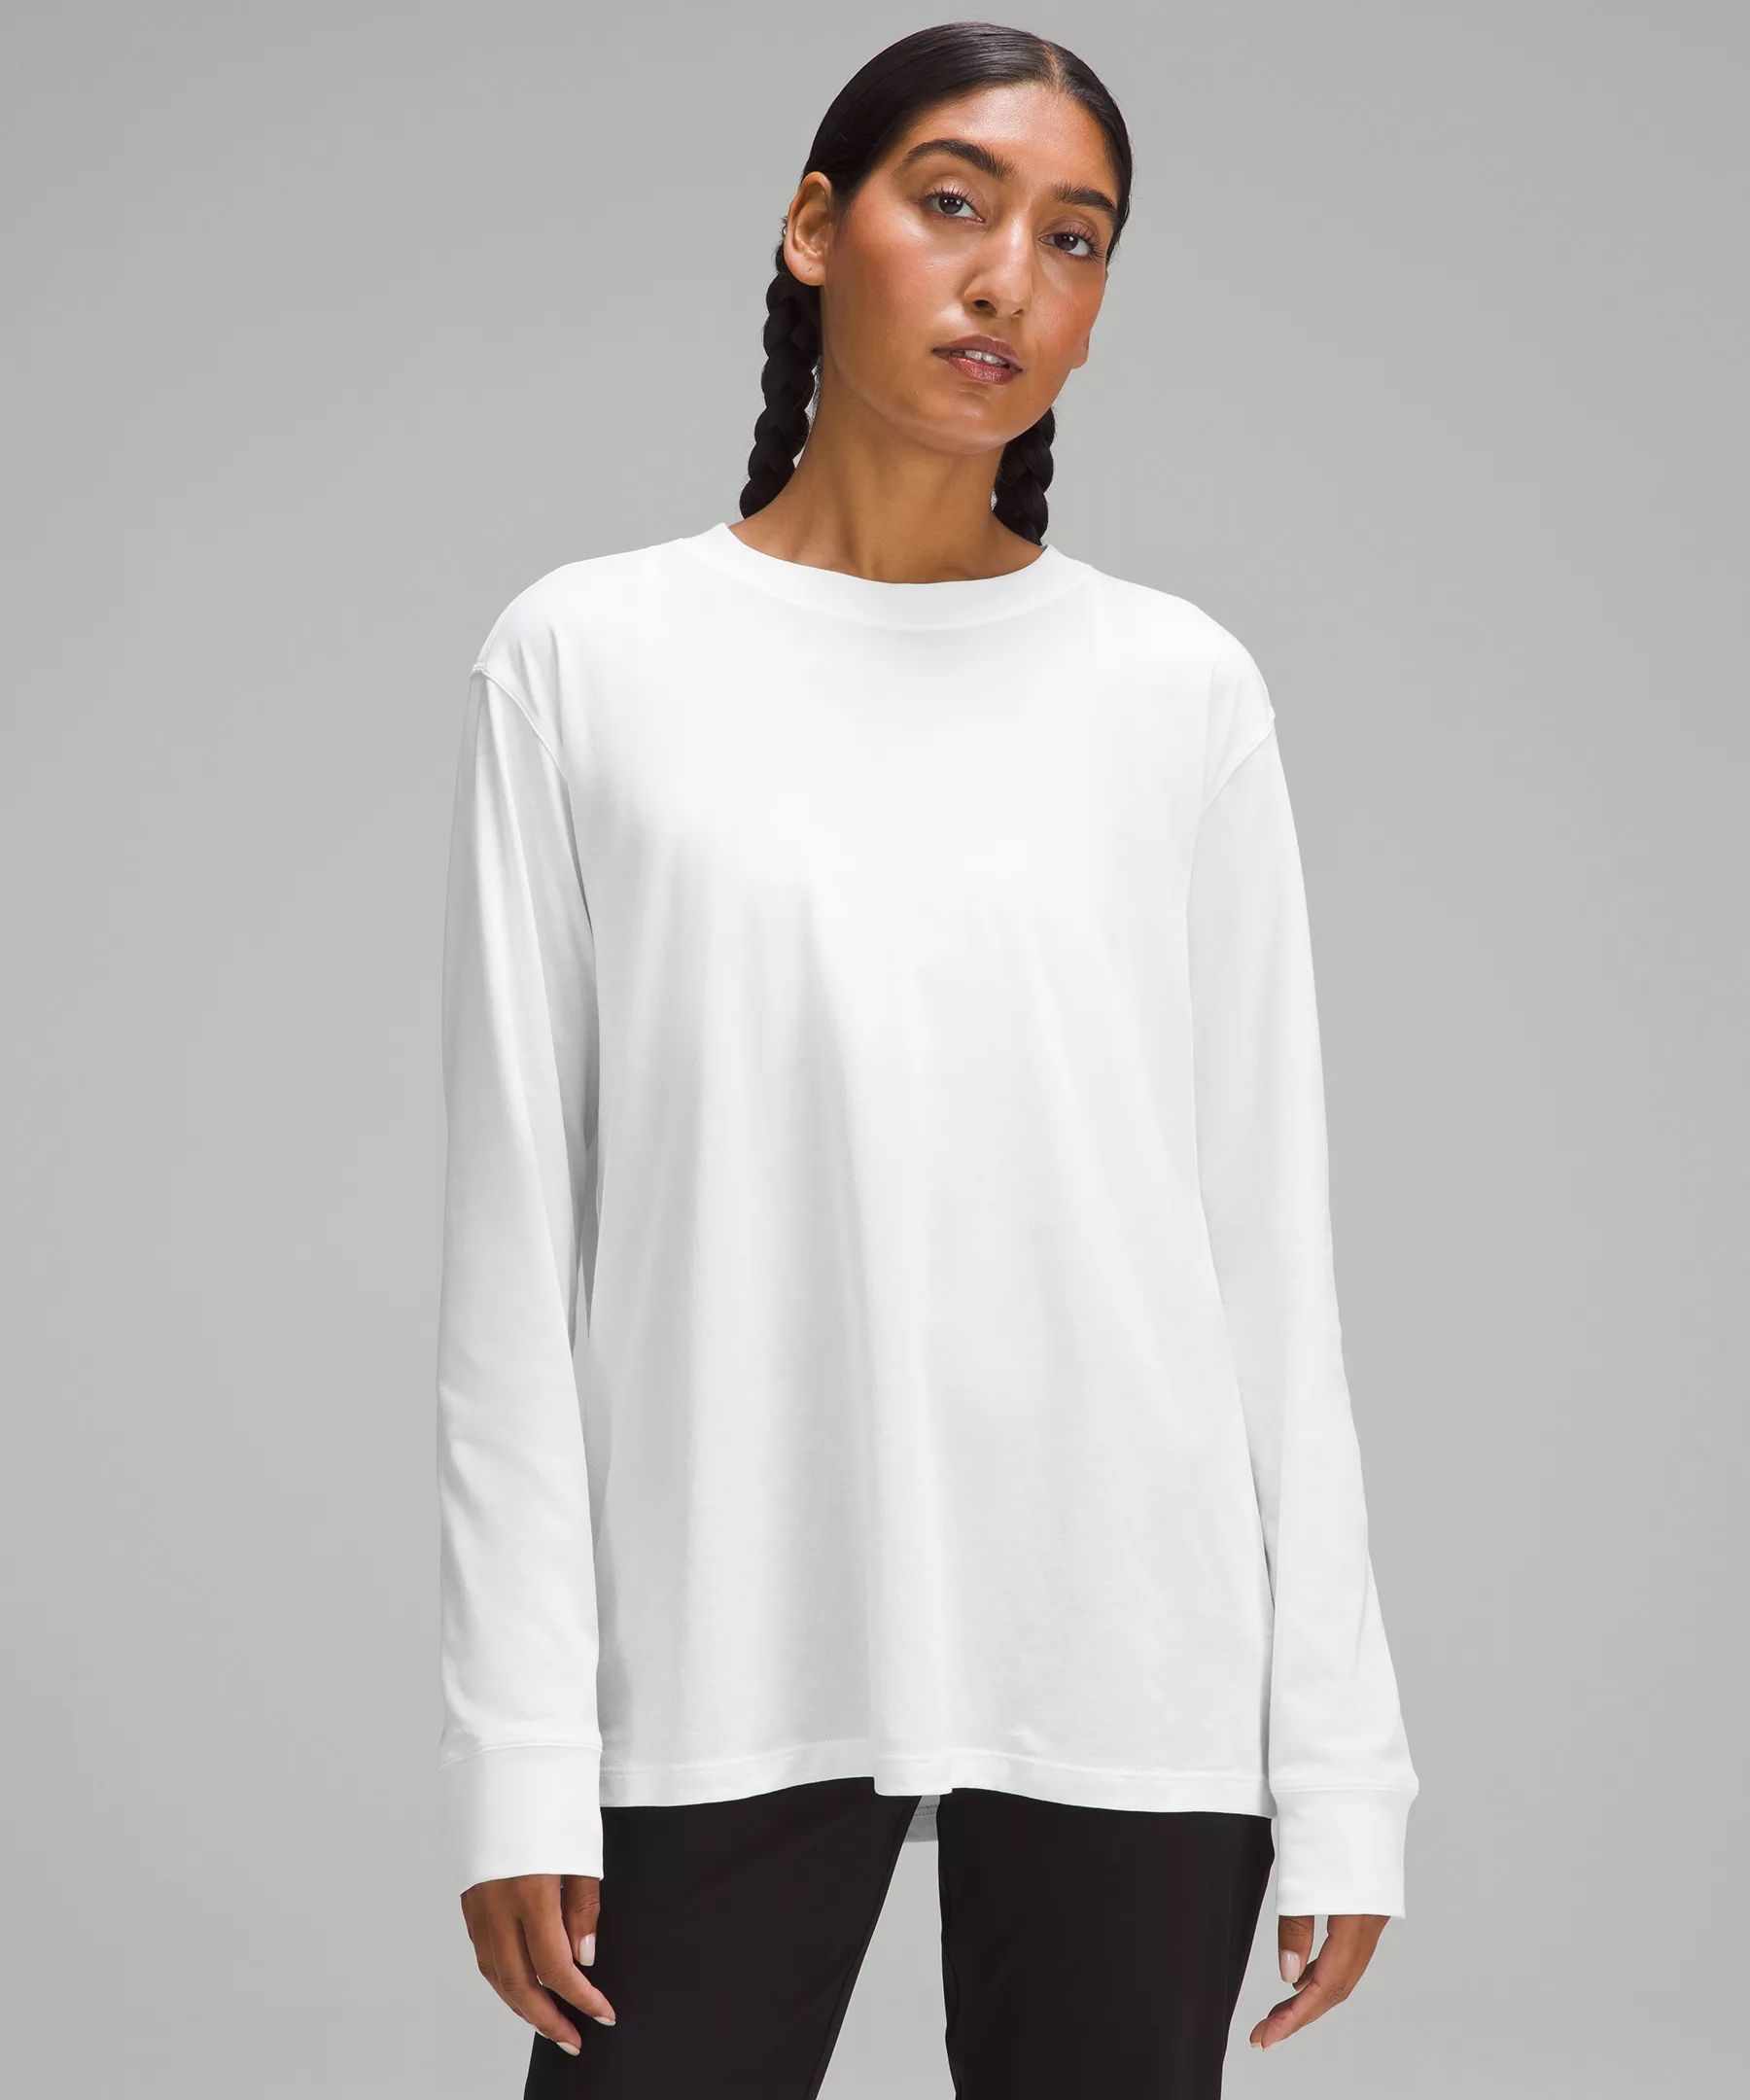 All Yours Long Sleeve Online Only | Lululemon (US)